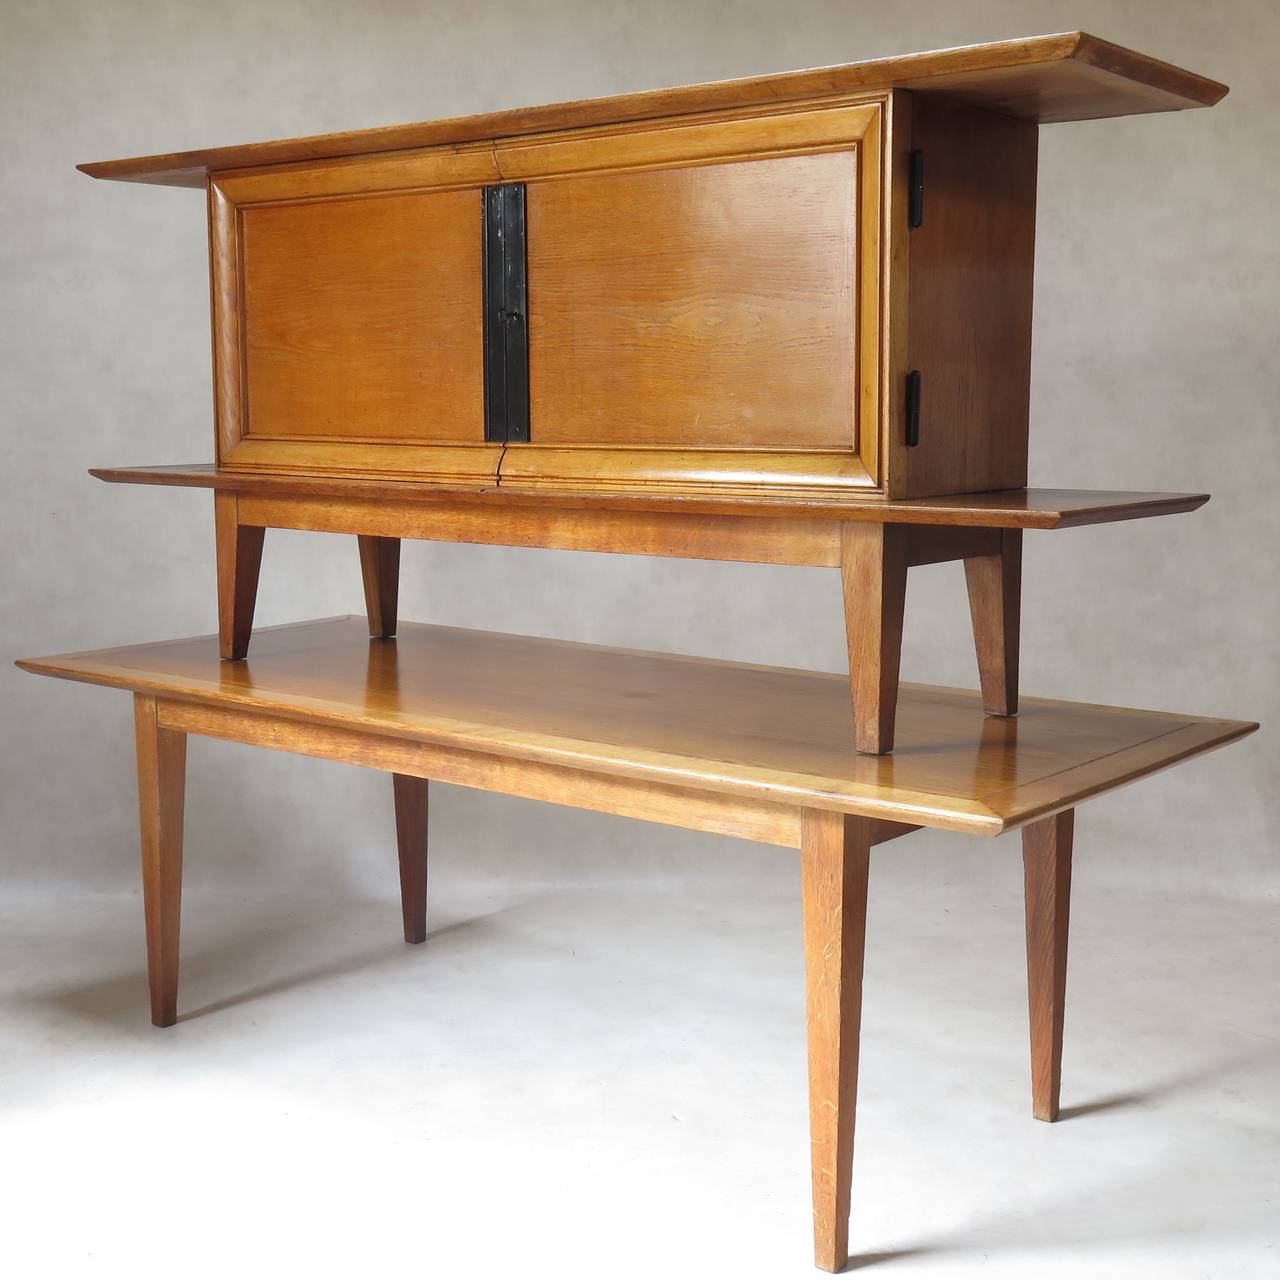 Beautiful, minimalist chic dining table and credenza set. The top of the table and credenza end in pagoda-style beveled edges. Tapered legs. Lovely warm colored oak.

Dimensions provided below are for the table. The sideboard measures (in